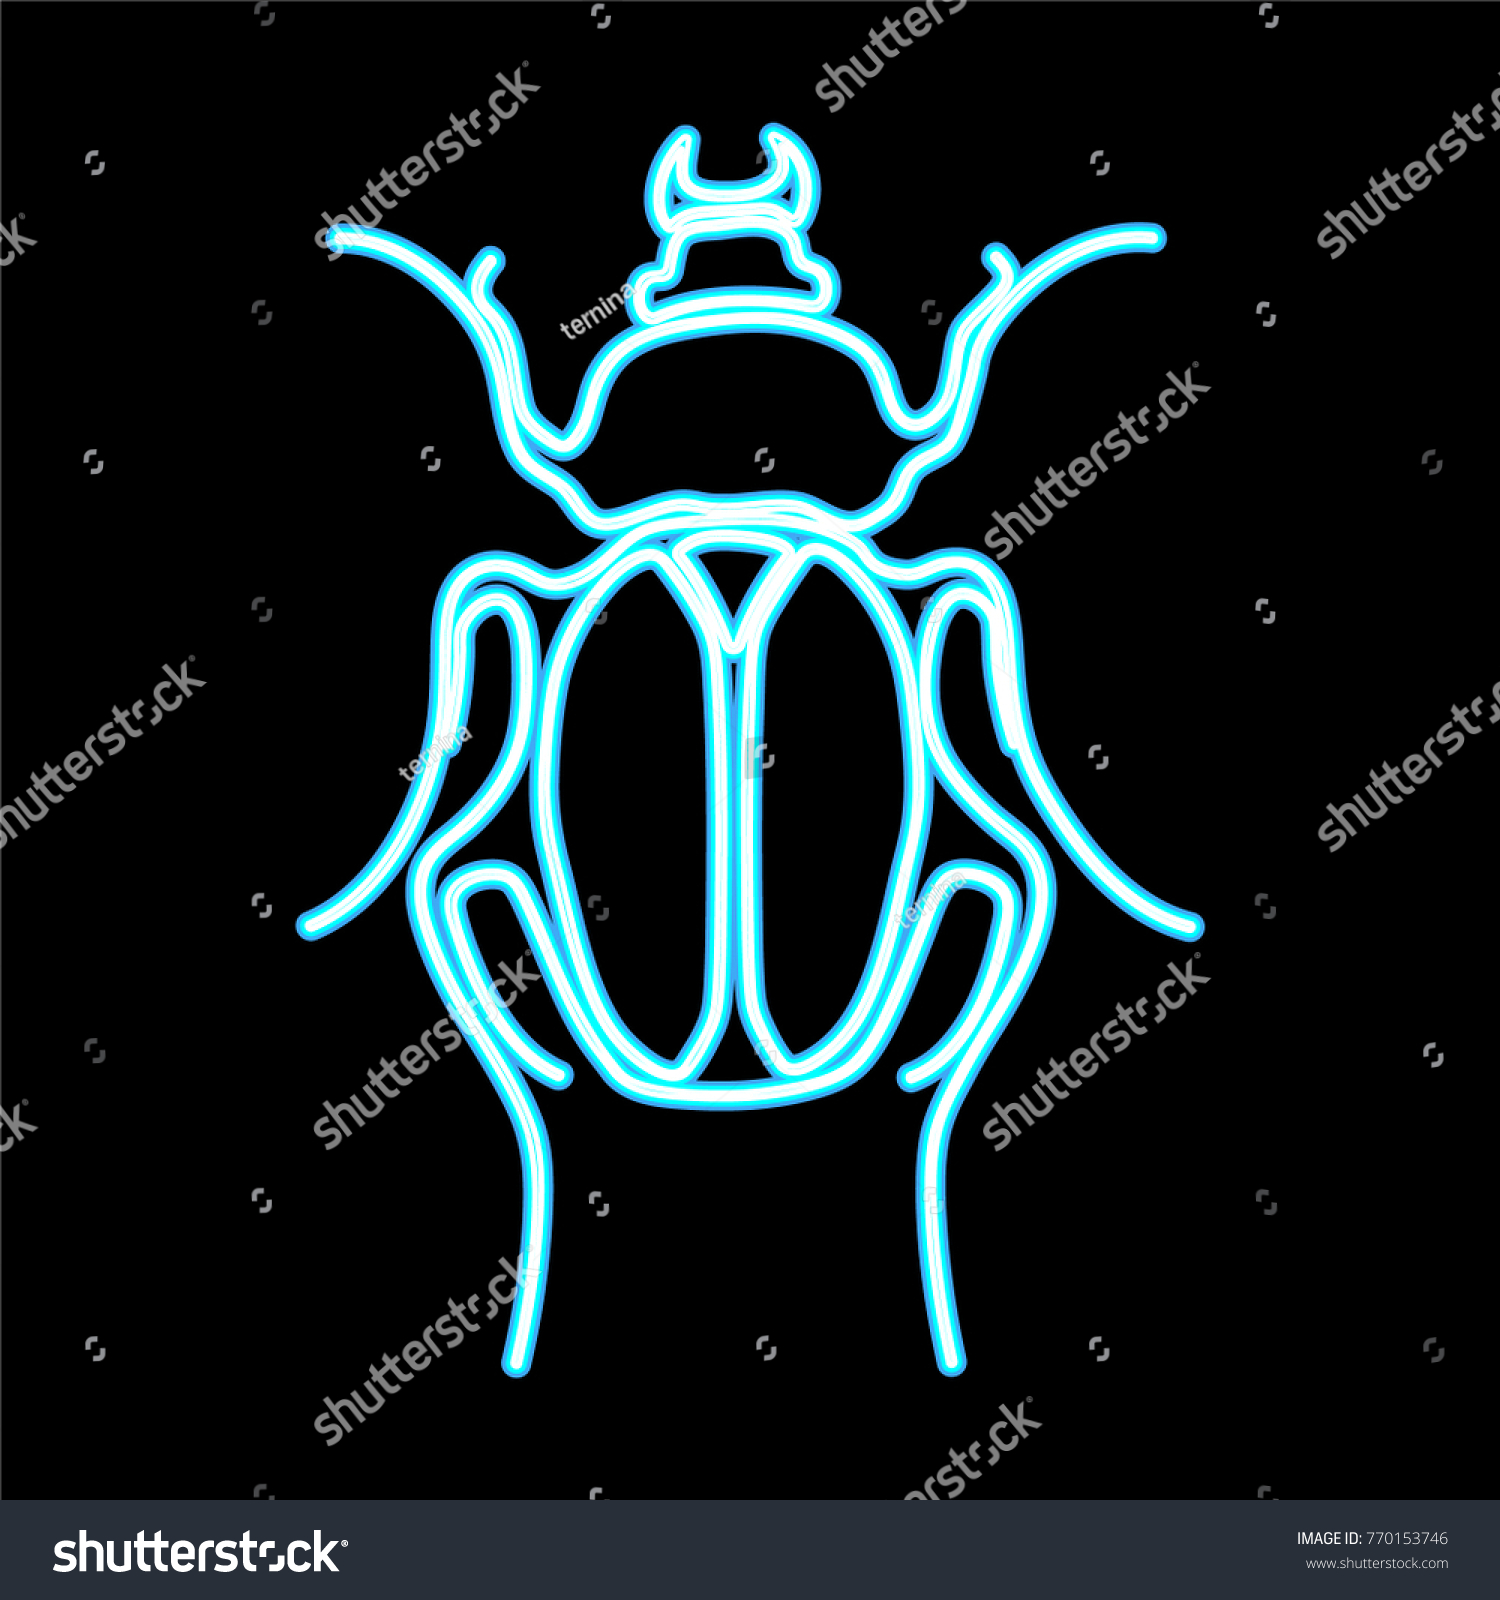 Blue Abstract Neon Bug Stylized Vector Stock Vector (Royalty Free ...